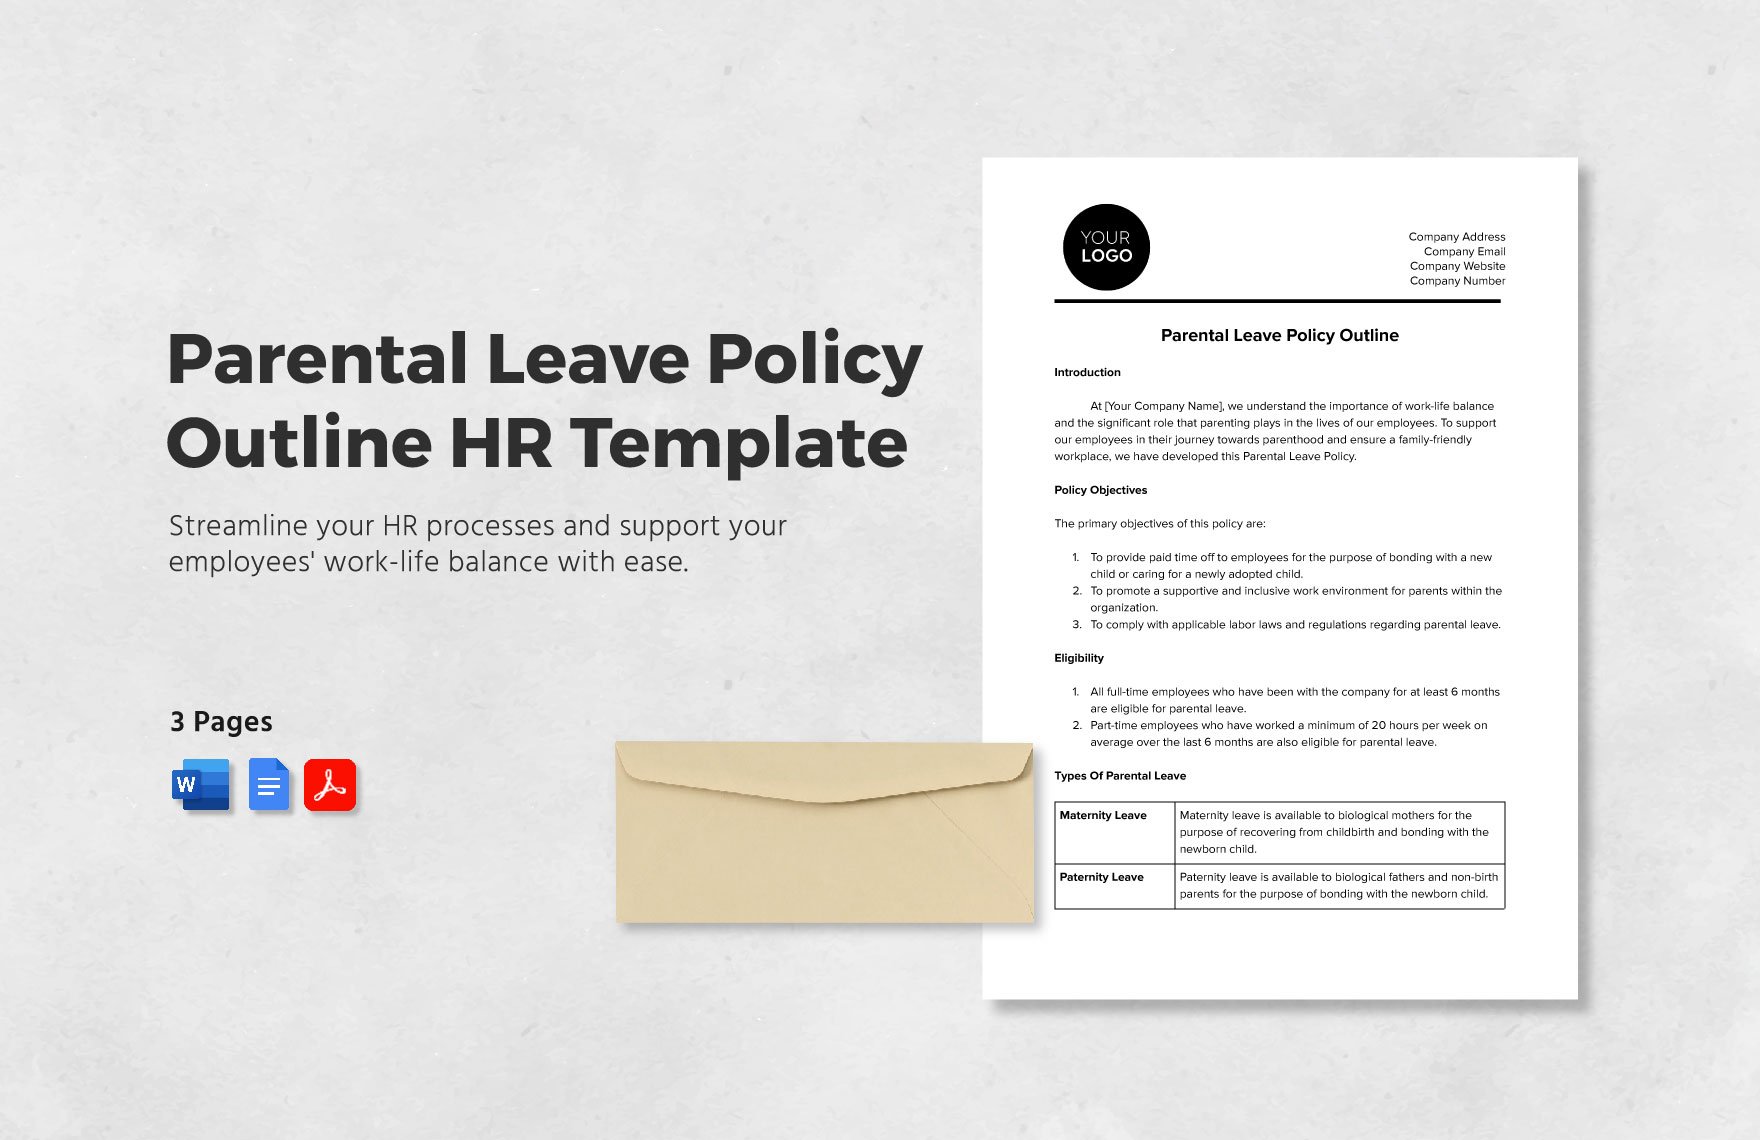 Parental Leave Policy Outline HR Template